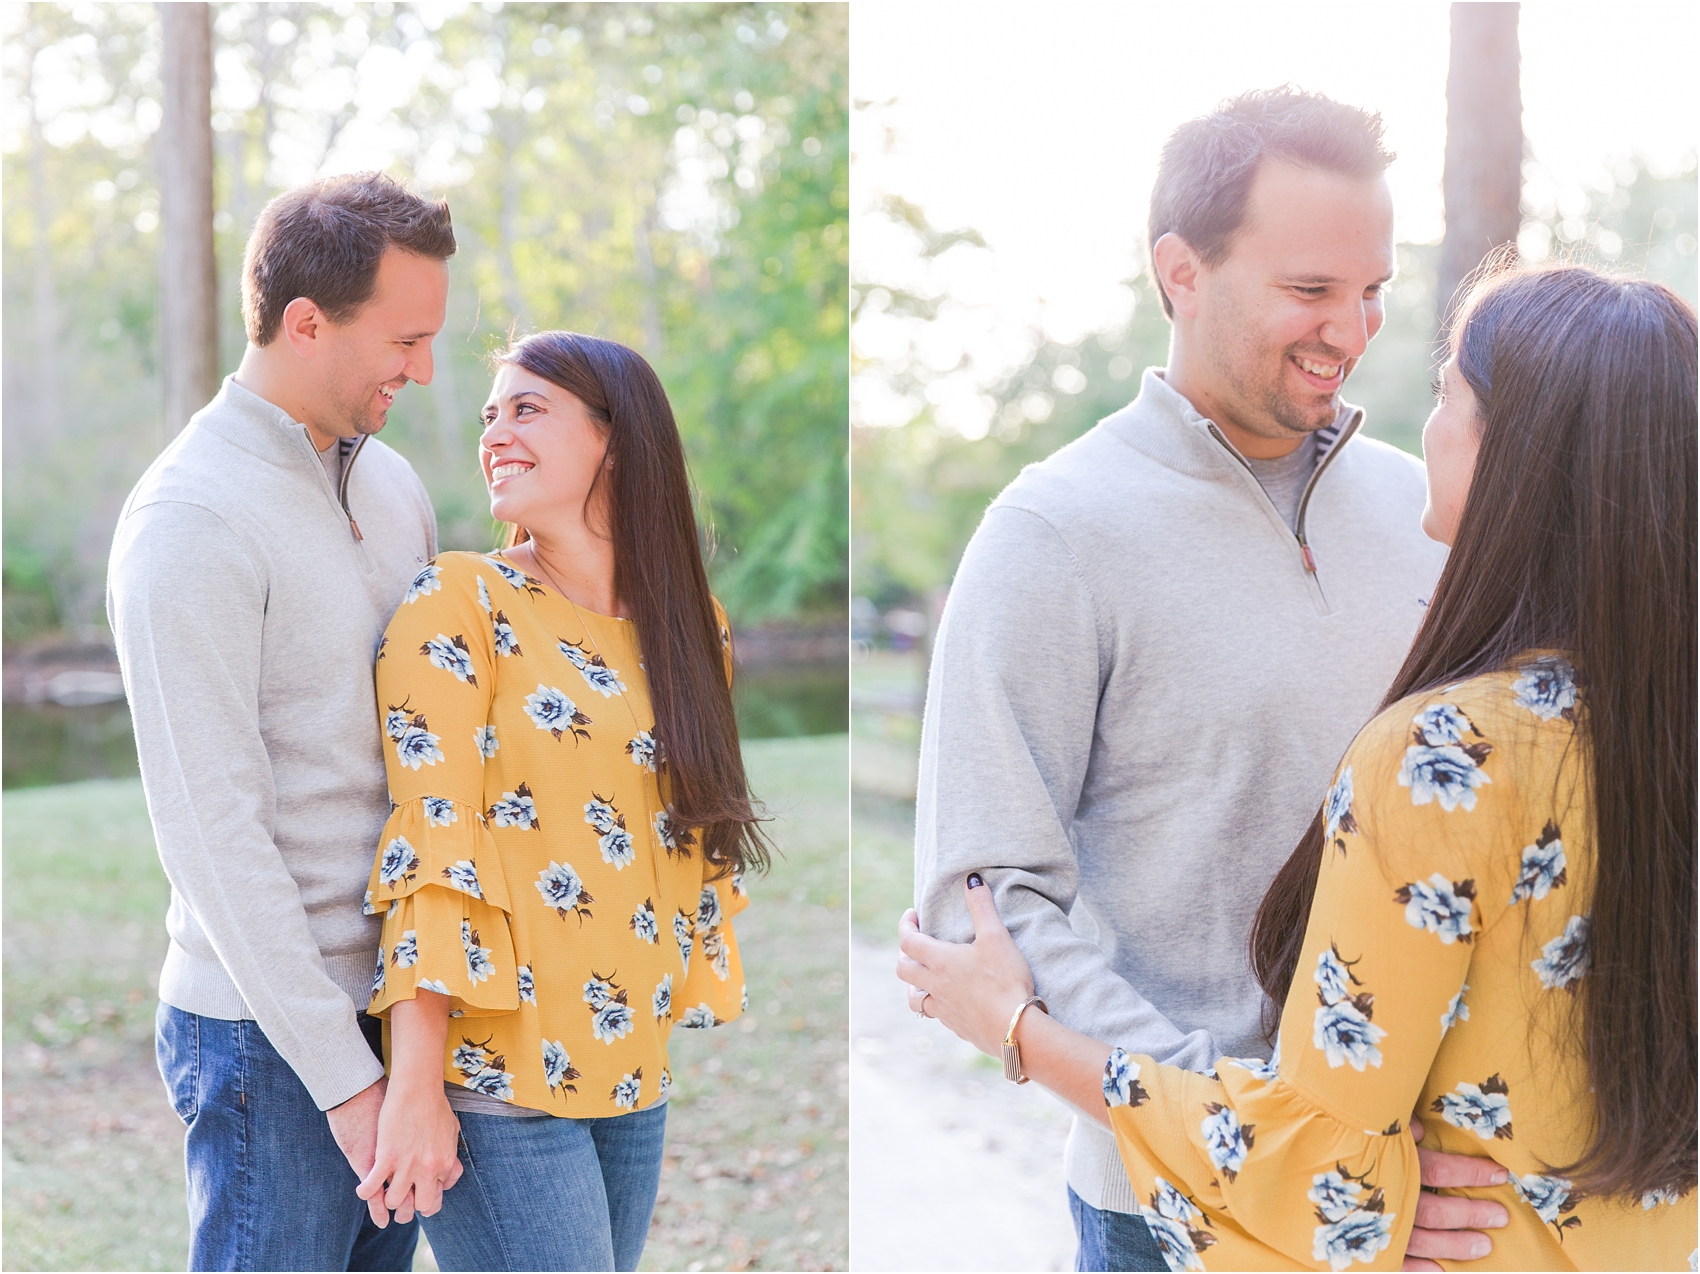 relaxed-autumn-engagement-photos-at-hudson-mills-metropark-in-dexter-mi-by-courtney-carolyn-photography_0020.jpg